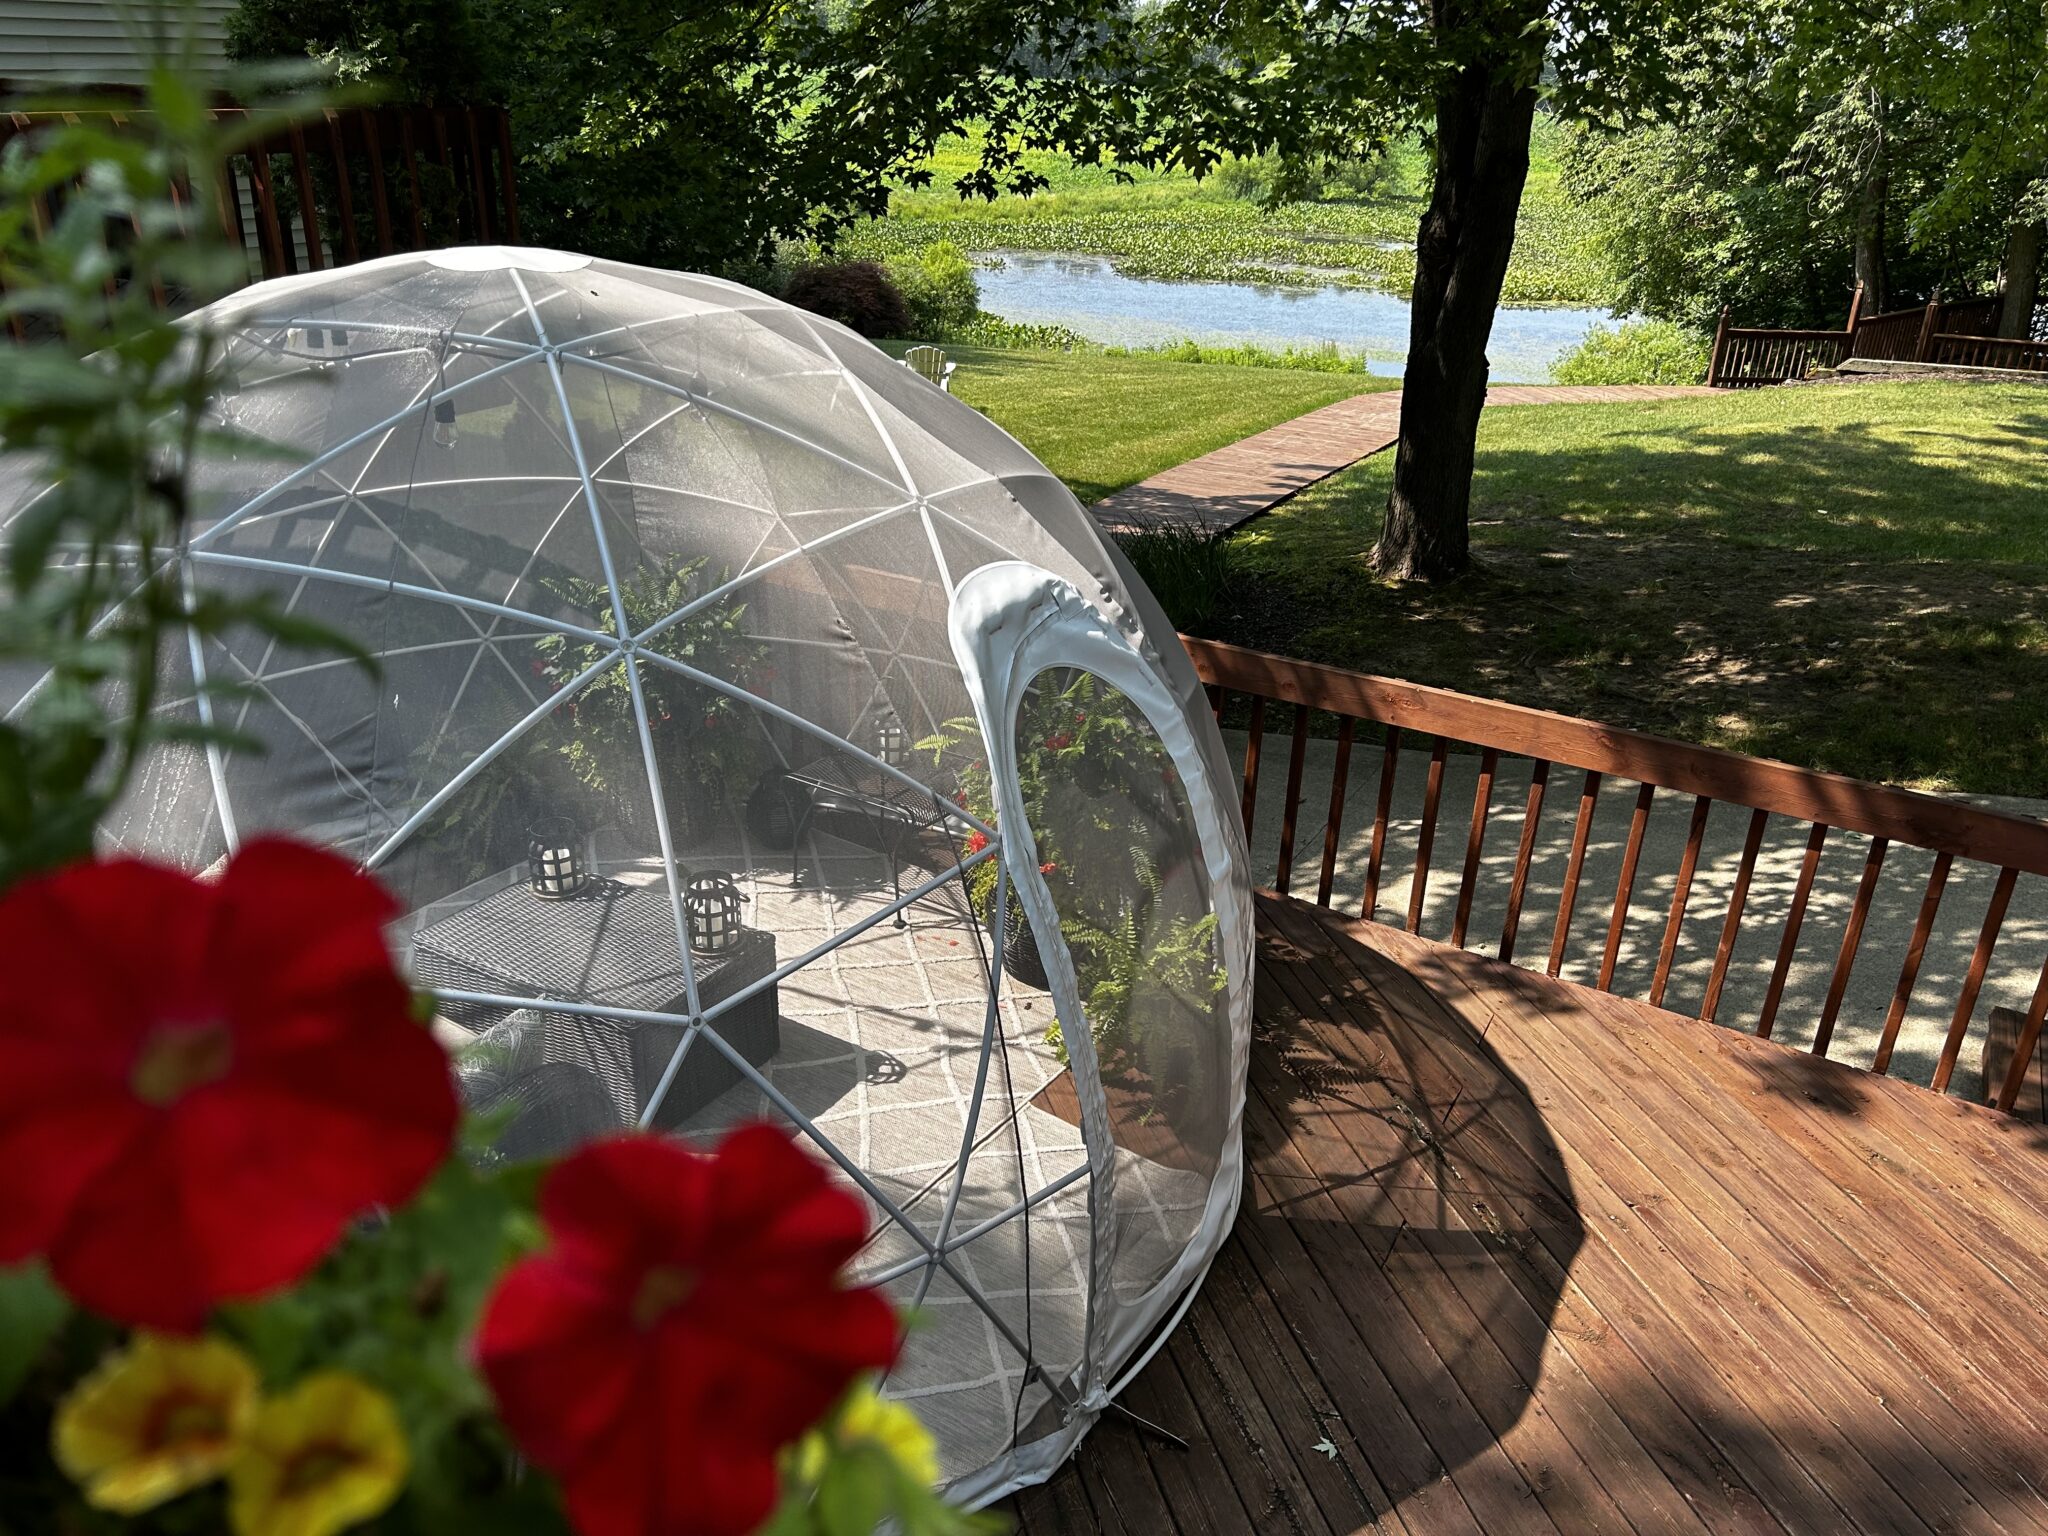 Garden dome igloo located on the deck of the Castle Keep building overlooking the pond